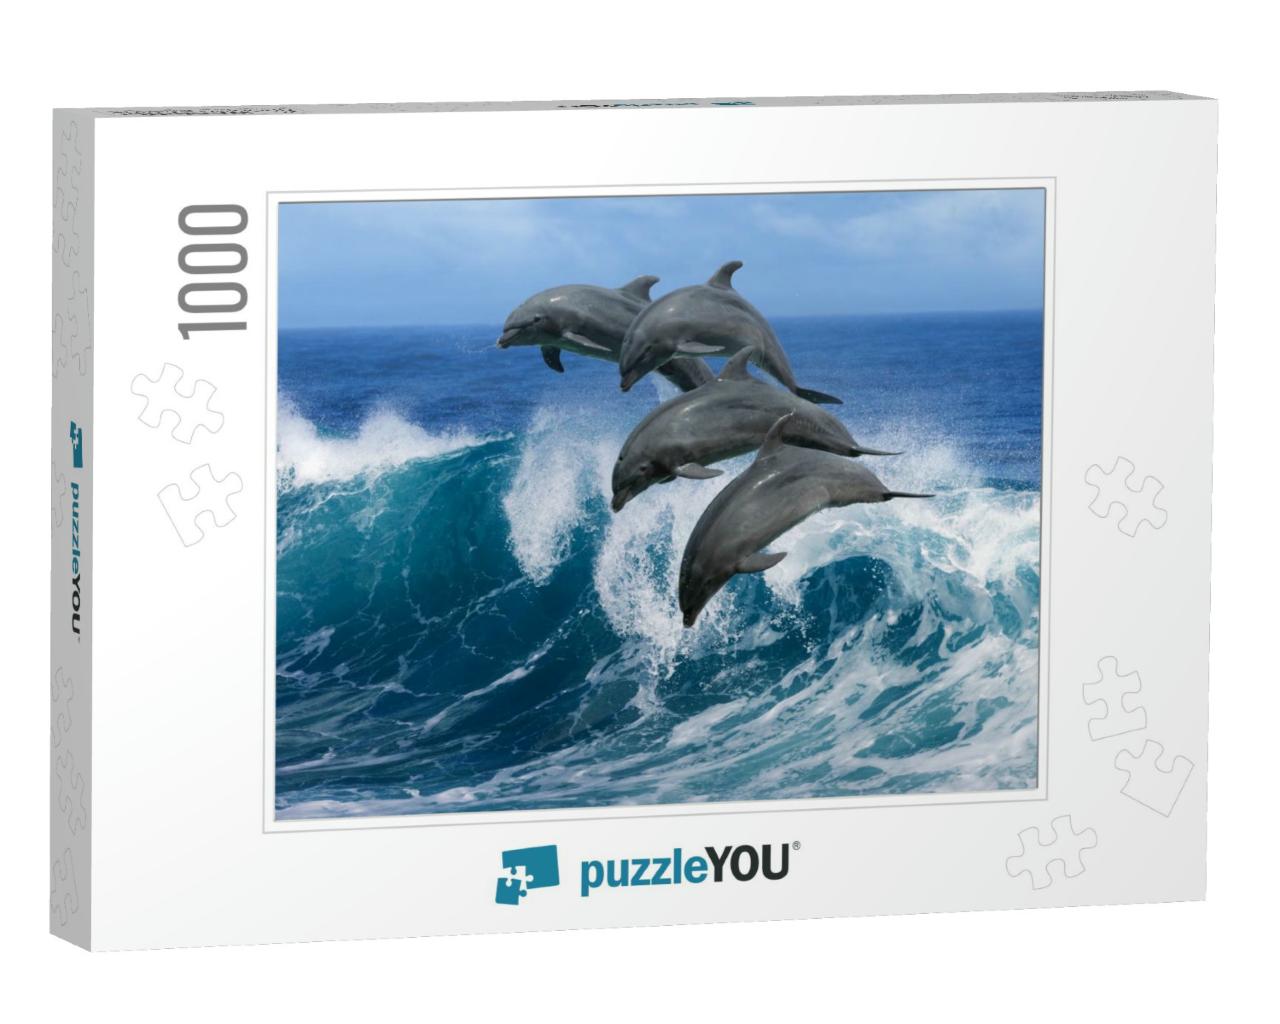 Four Beautiful Dolphins Jumping Over Breaking Waves. Hawa... Jigsaw Puzzle with 1000 pieces